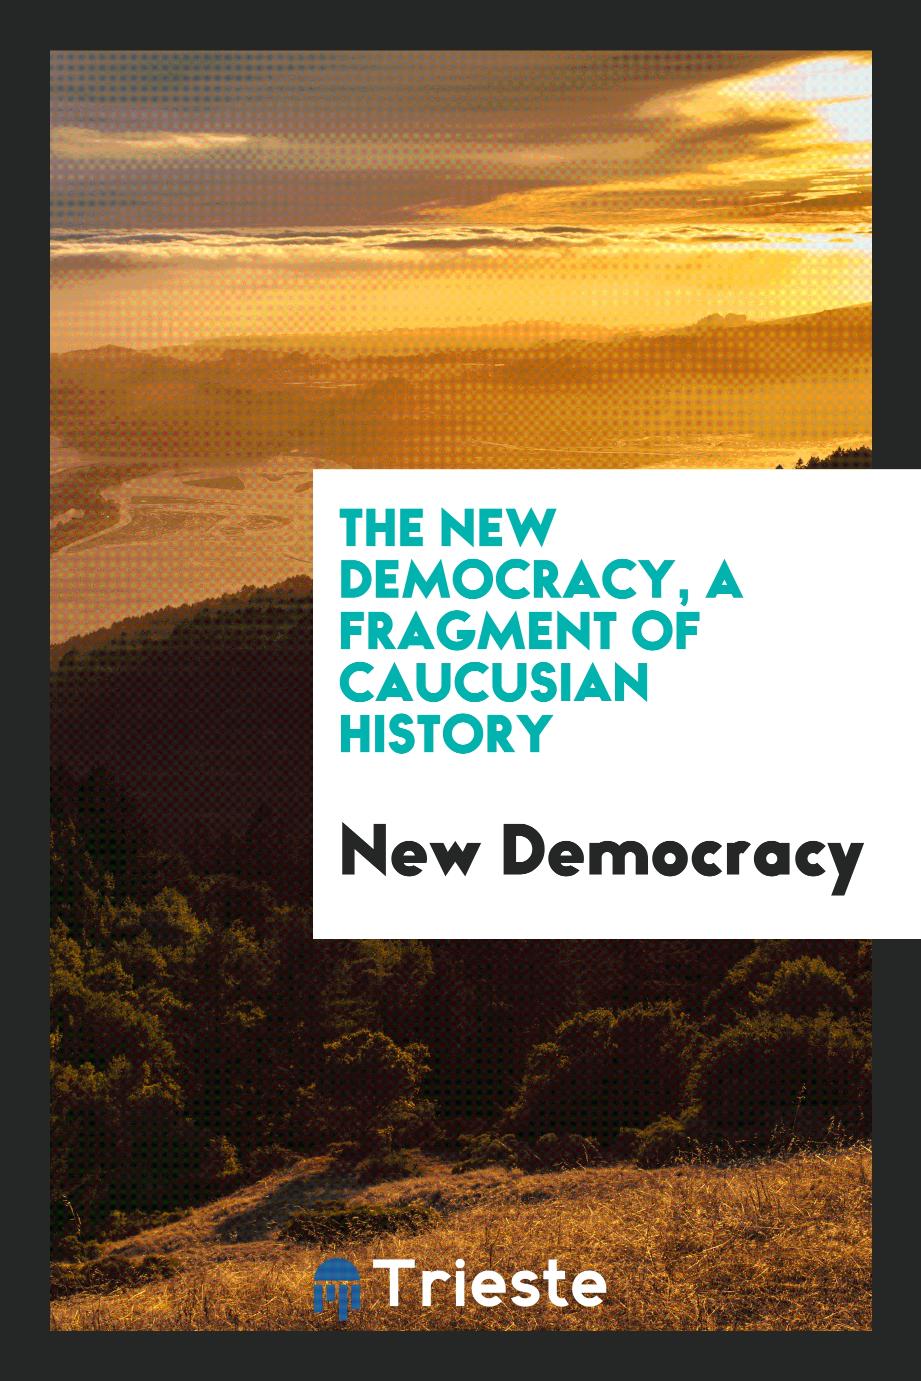 The New Democracy, a Fragment of Caucusian History